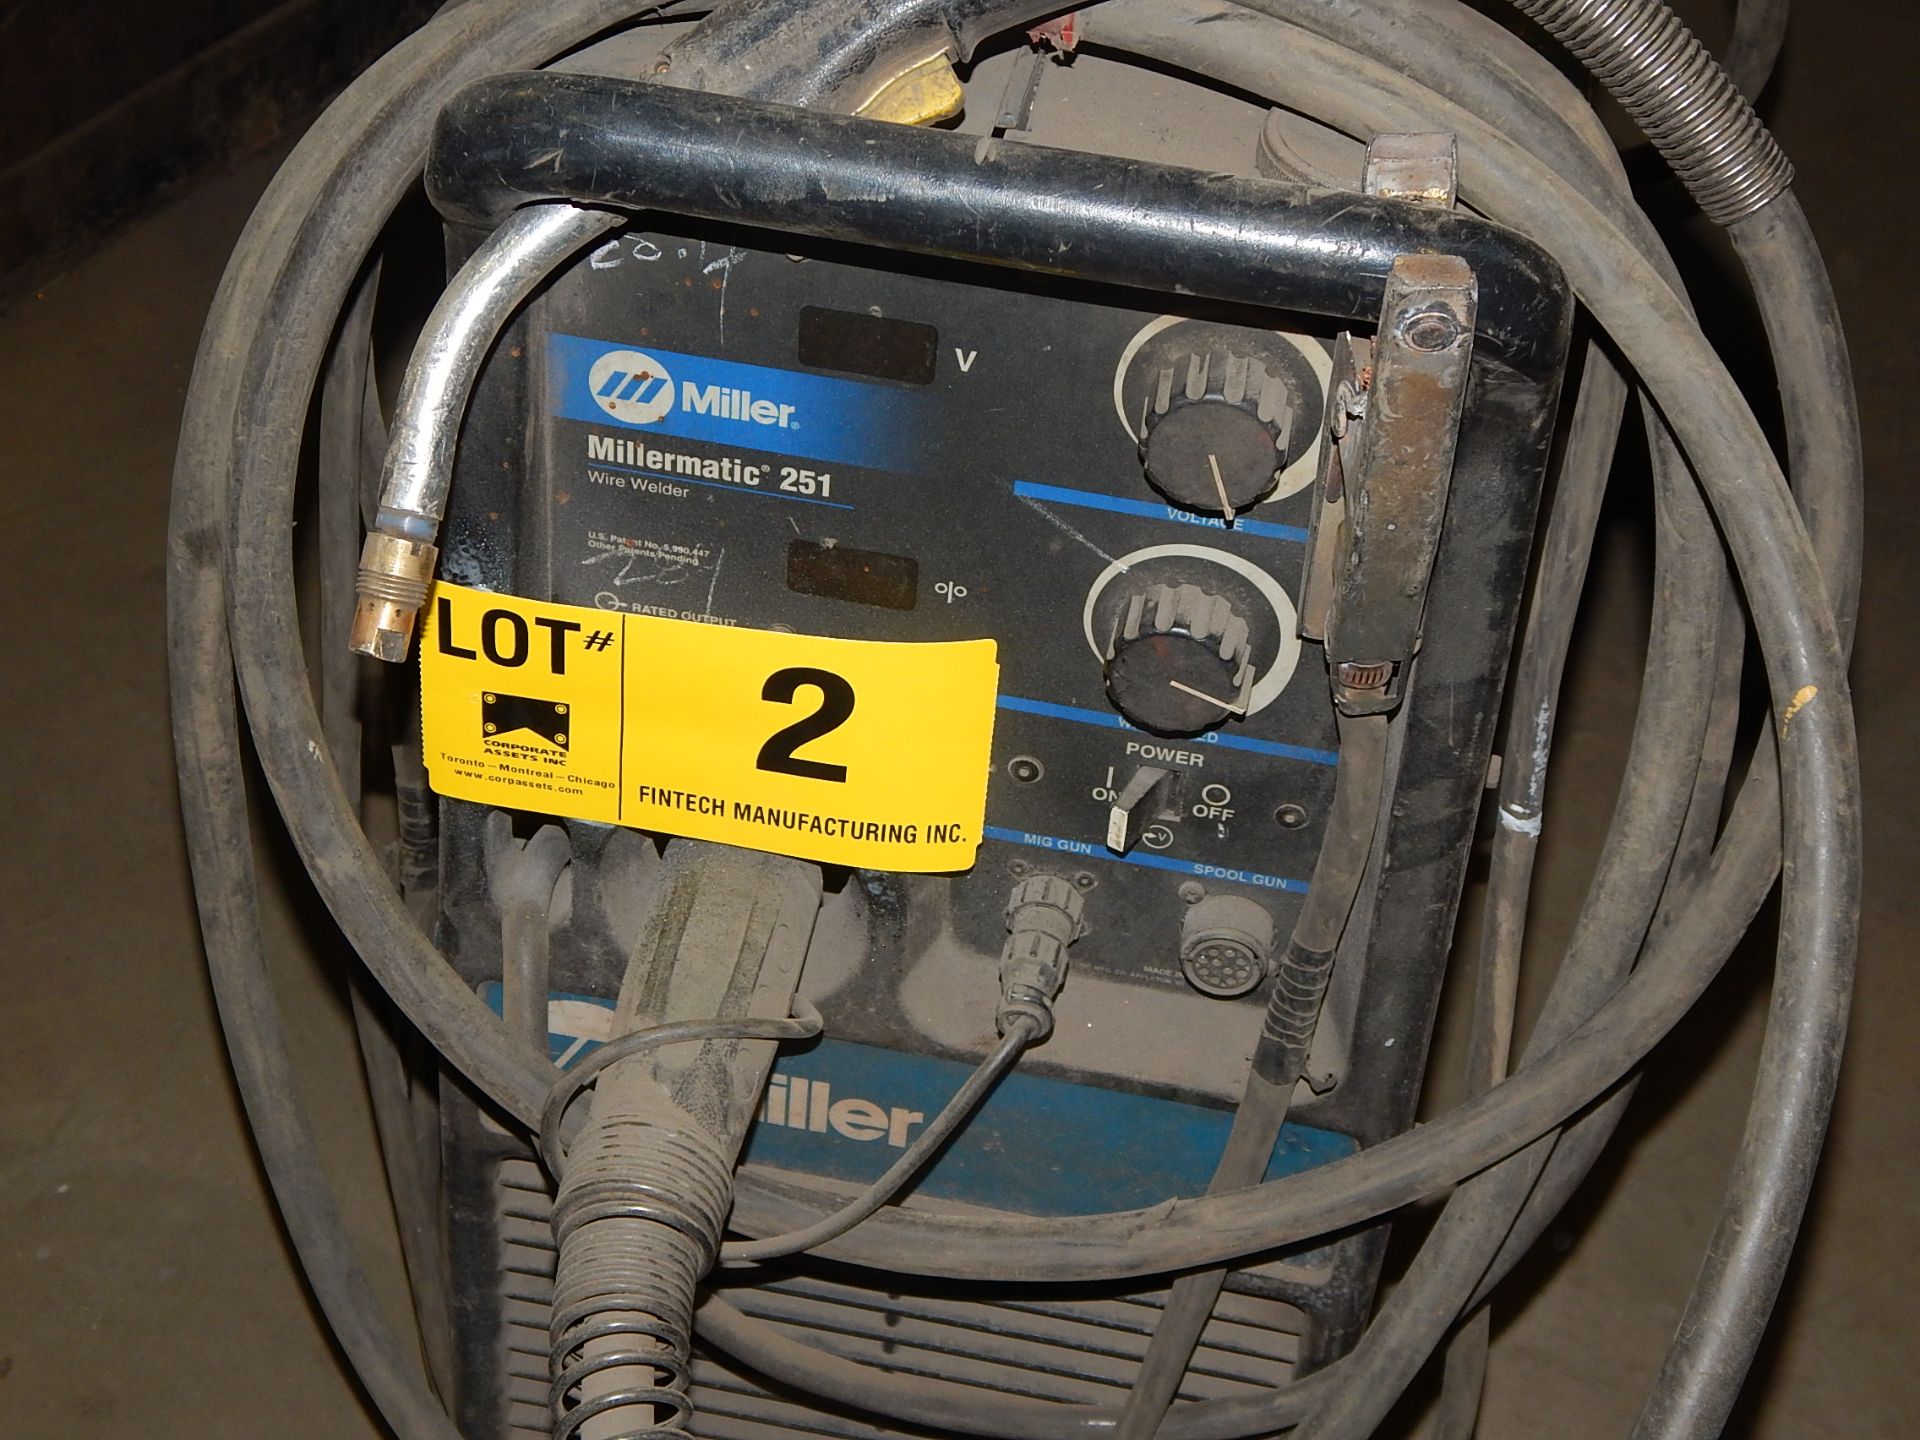 MILLER MILLERMATIC 251 DIGITAL MIG WELDER WITH CABLES AND GUN S/N: LG491344B - Image 2 of 3